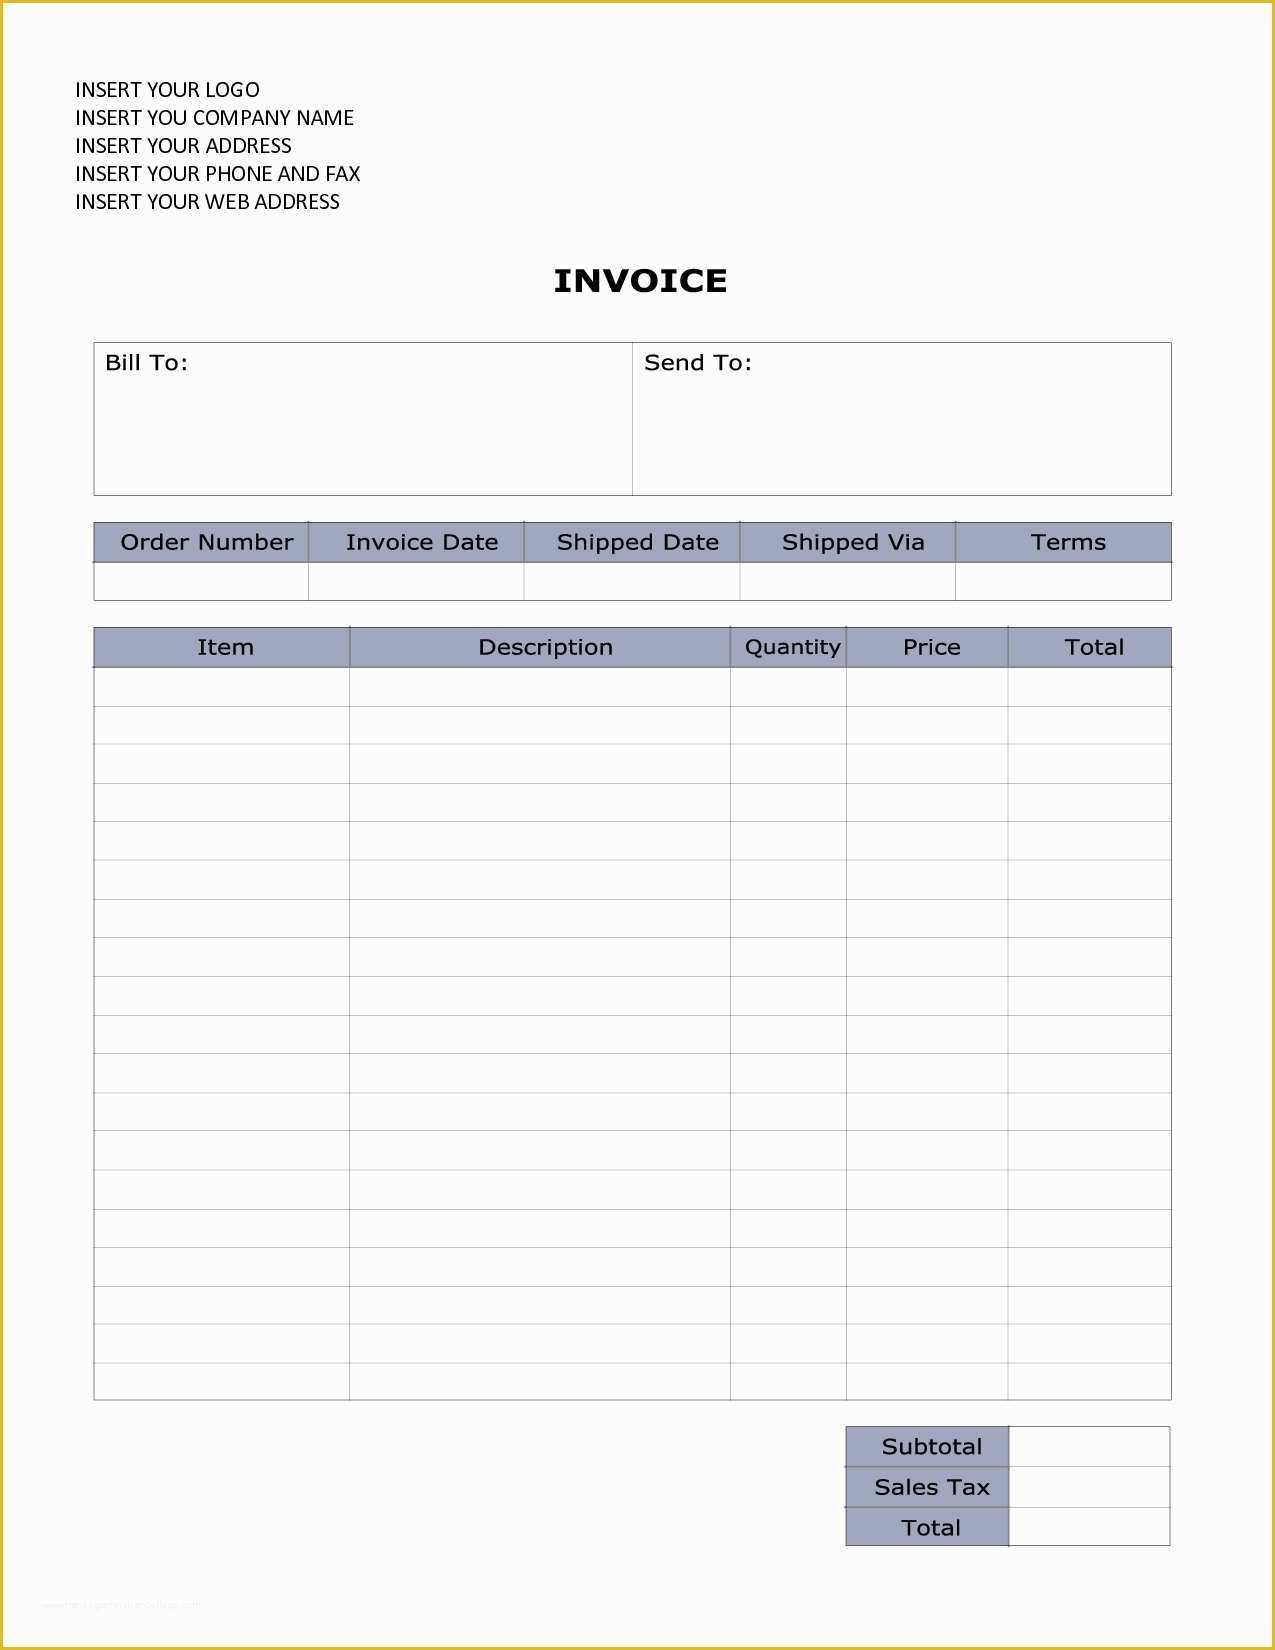 Basic Invoice Template Free Of Free Printable Invoices Invoice Template Ideas